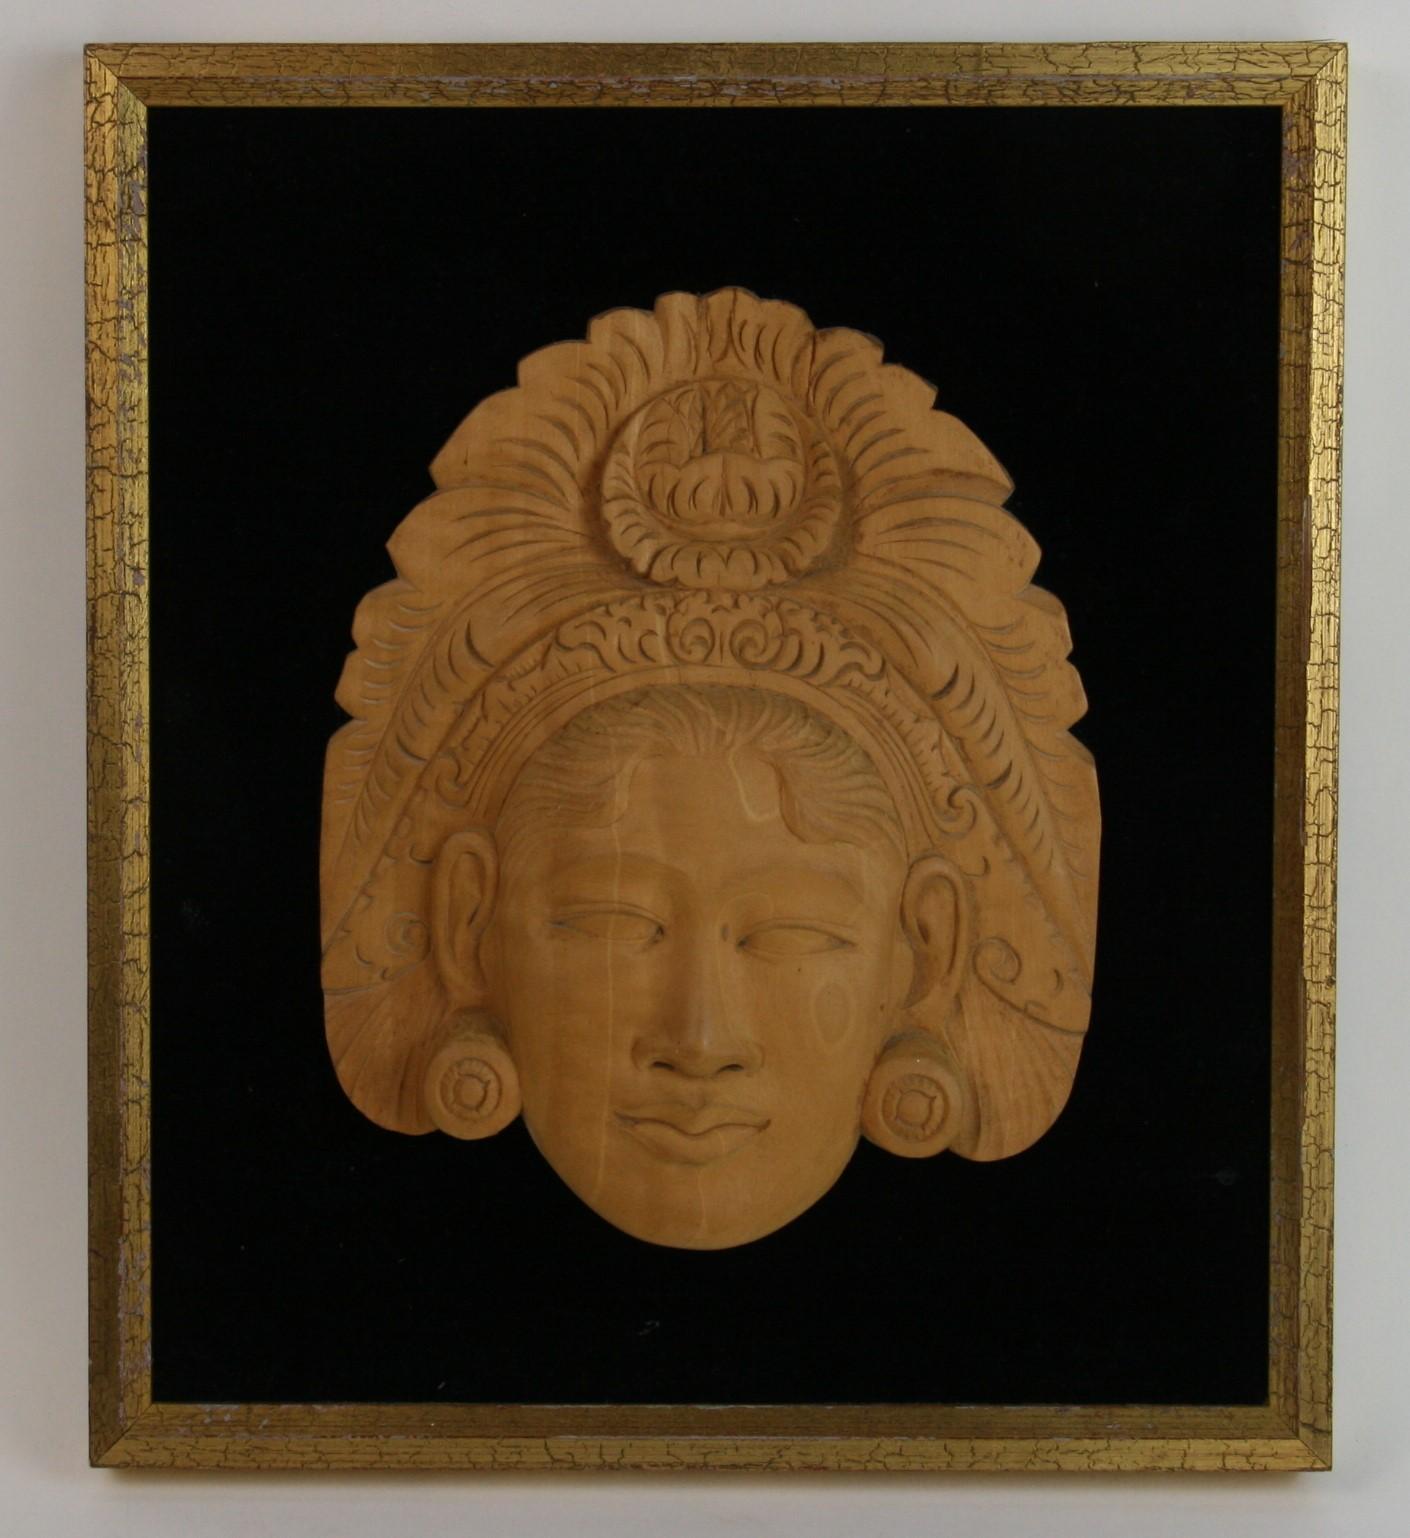 Pair of  Wood Figural Carvings Mounted in Frames  - Brown Figurative Sculpture by Unknown